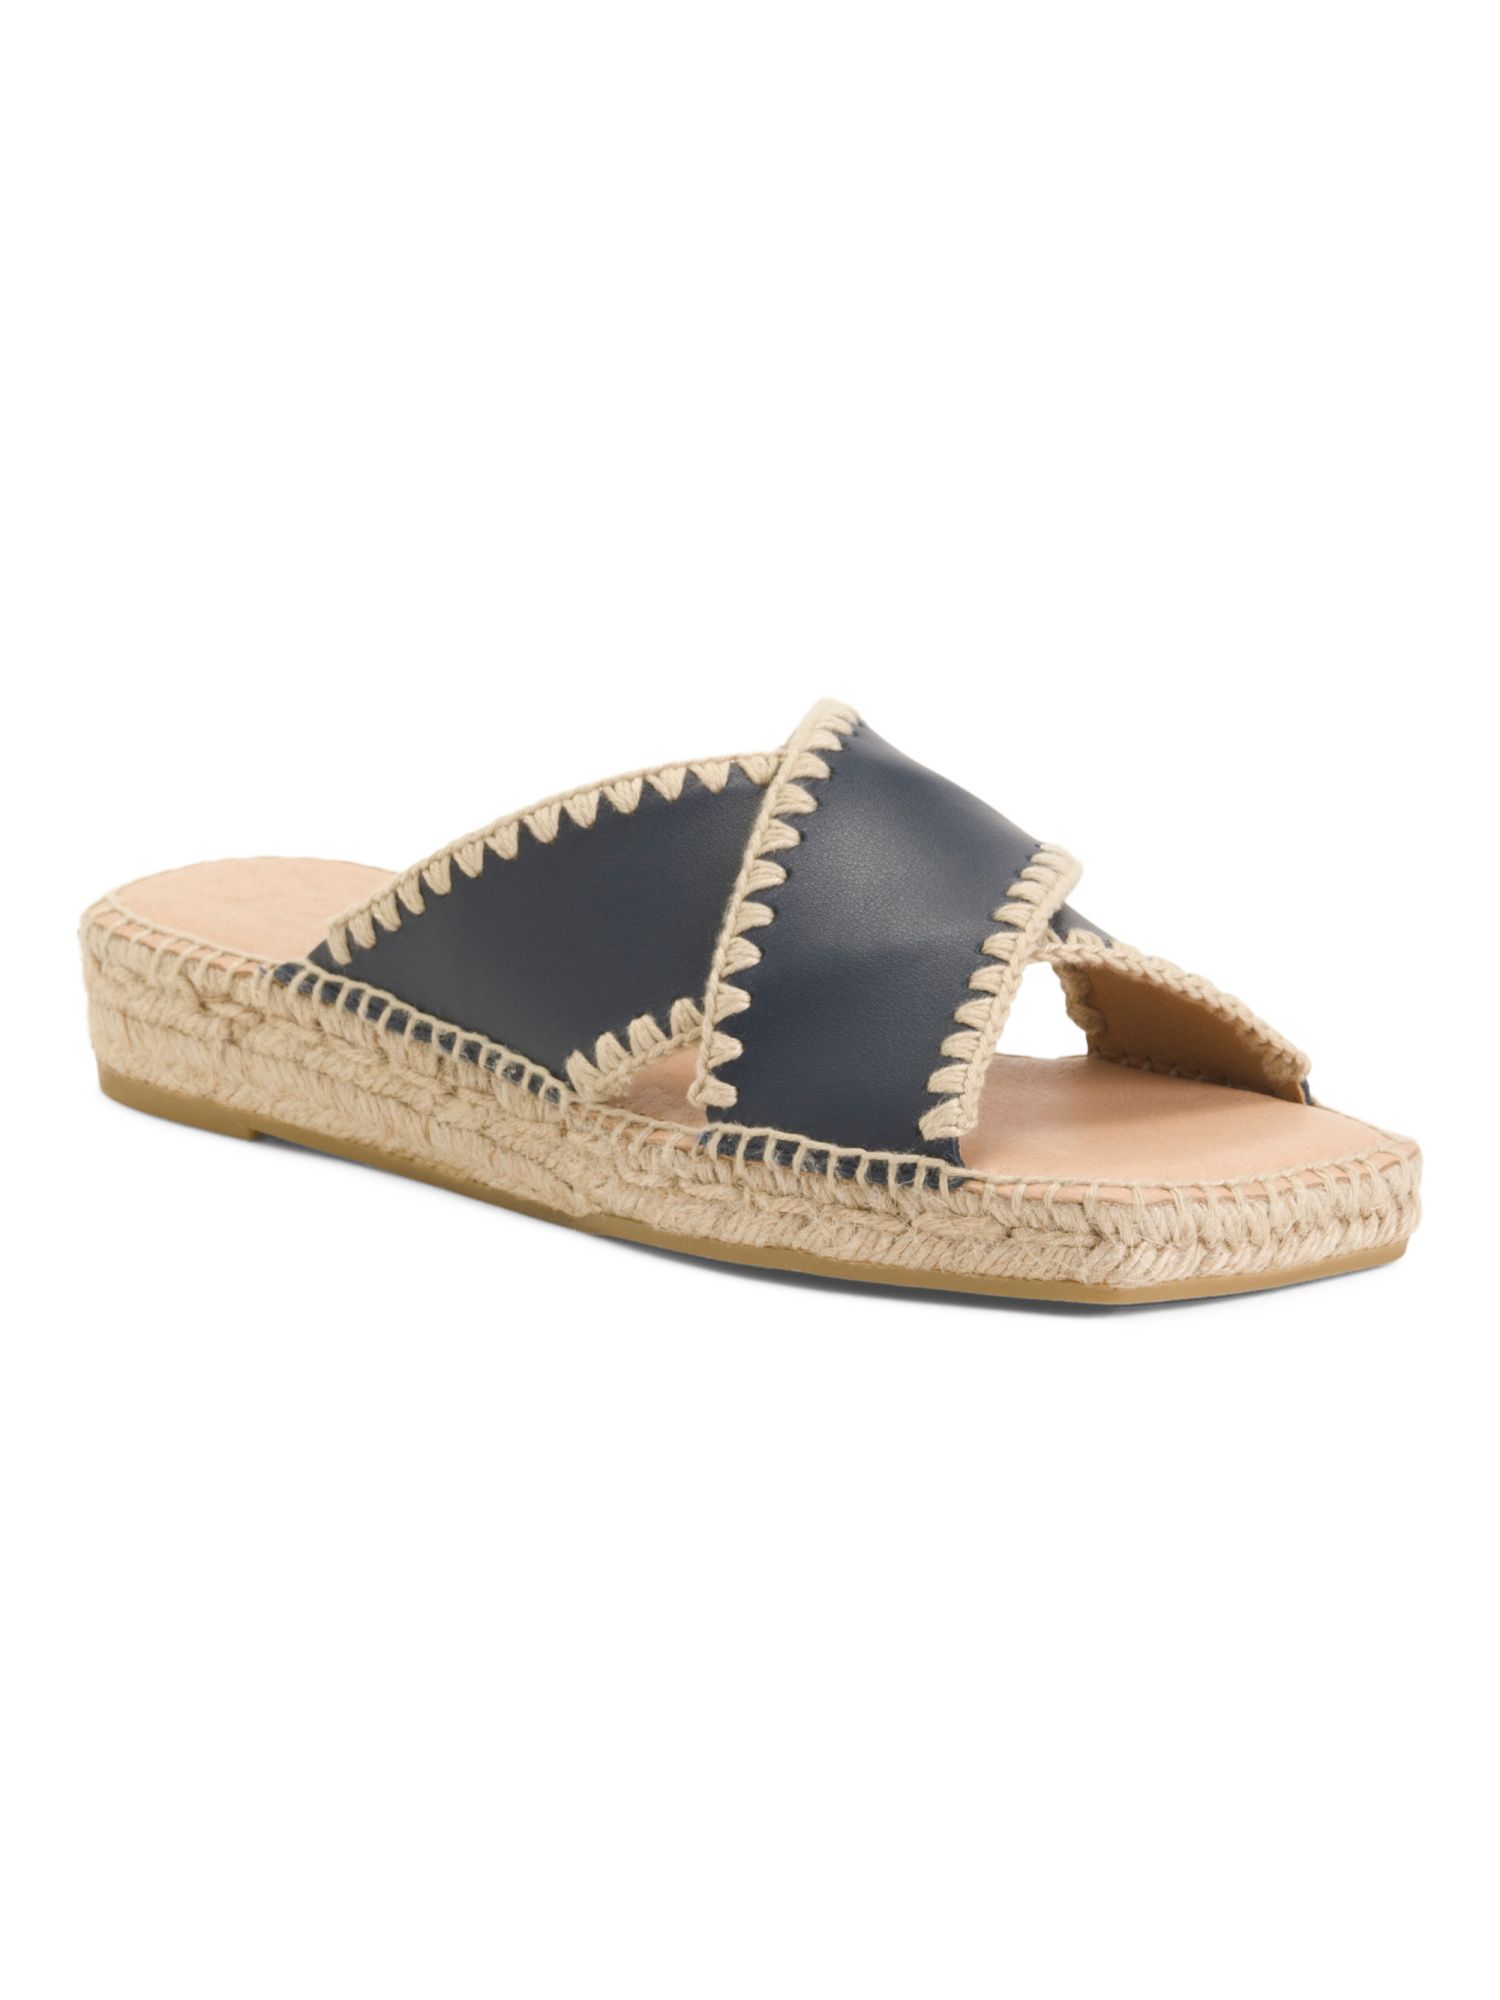 Made In Spain Leather Cross Band Espadrille Wedge Sandals | Women's Shoes | Marshalls | Marshalls